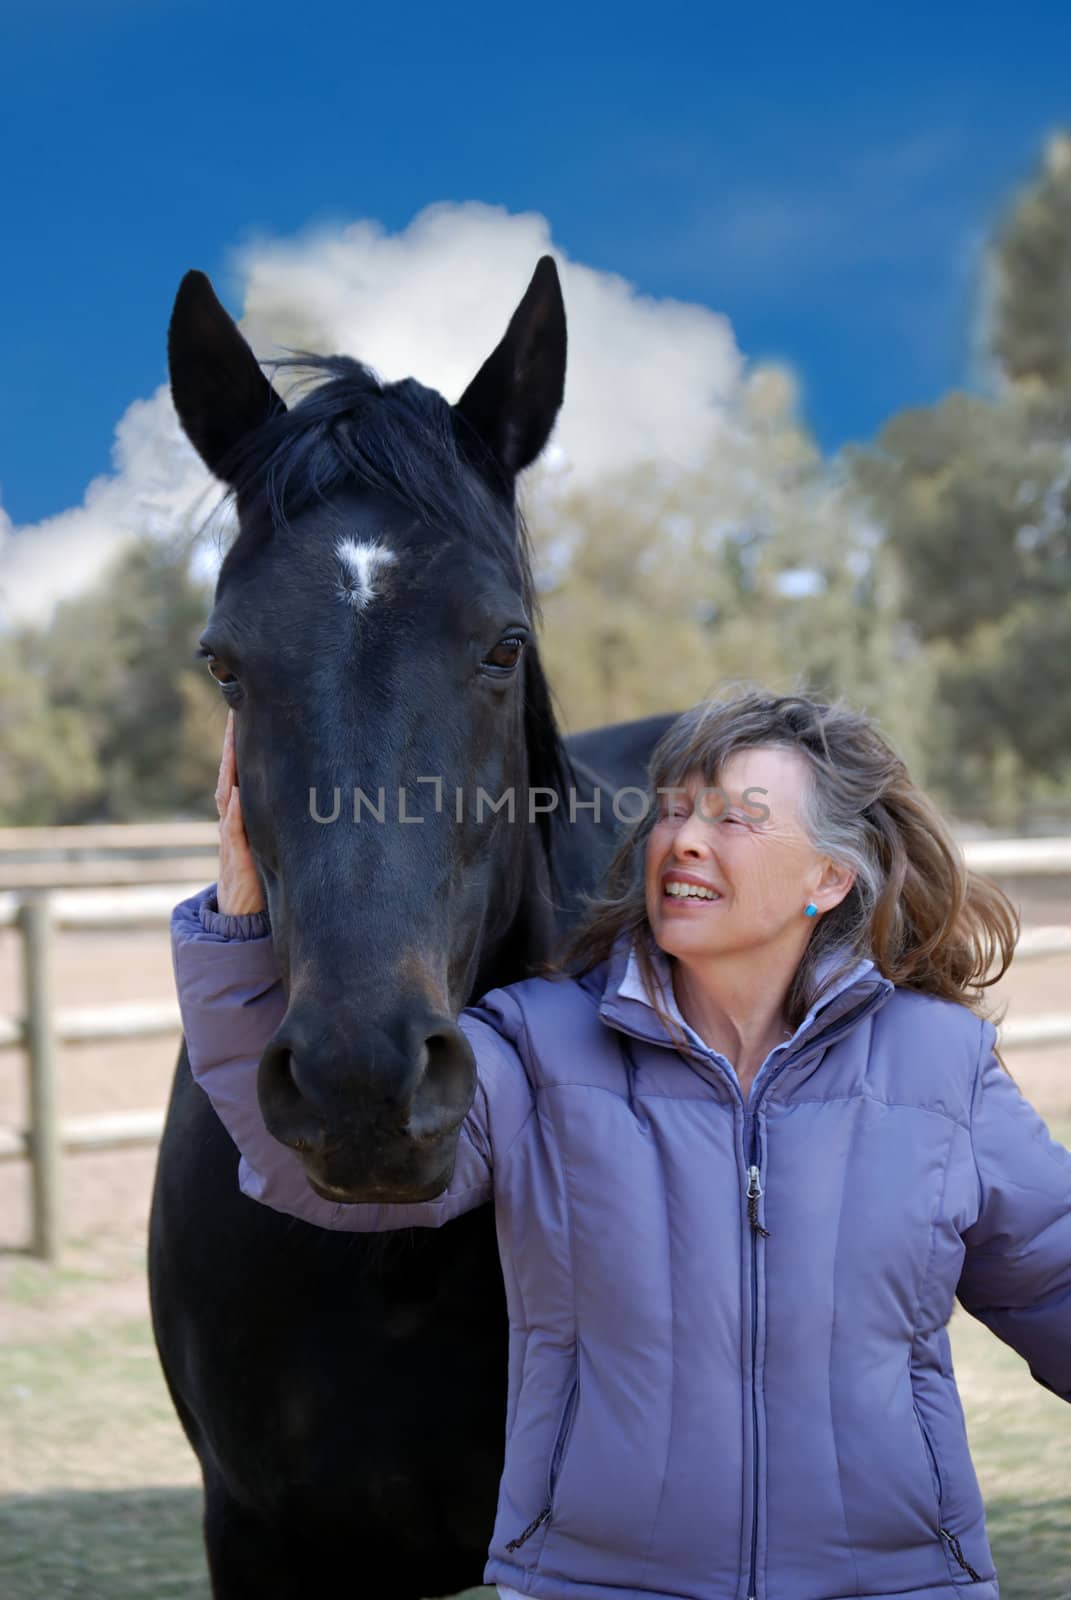 Woman and Black Horse by Eponaleah